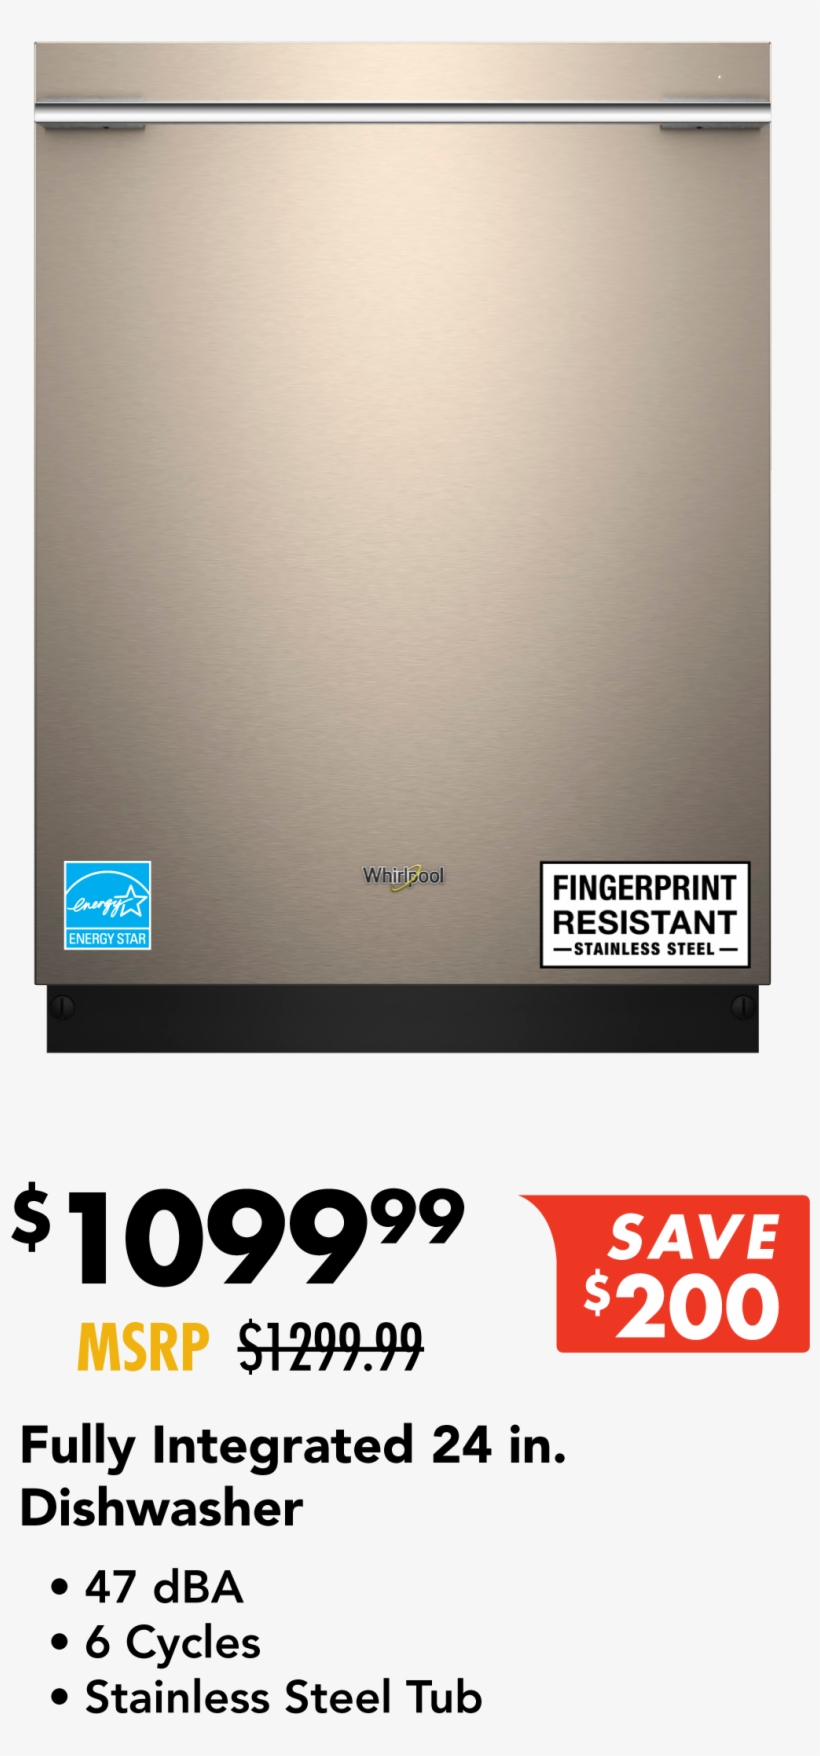 See All The Details In Store - Ikea Coupons, transparent png #2991286